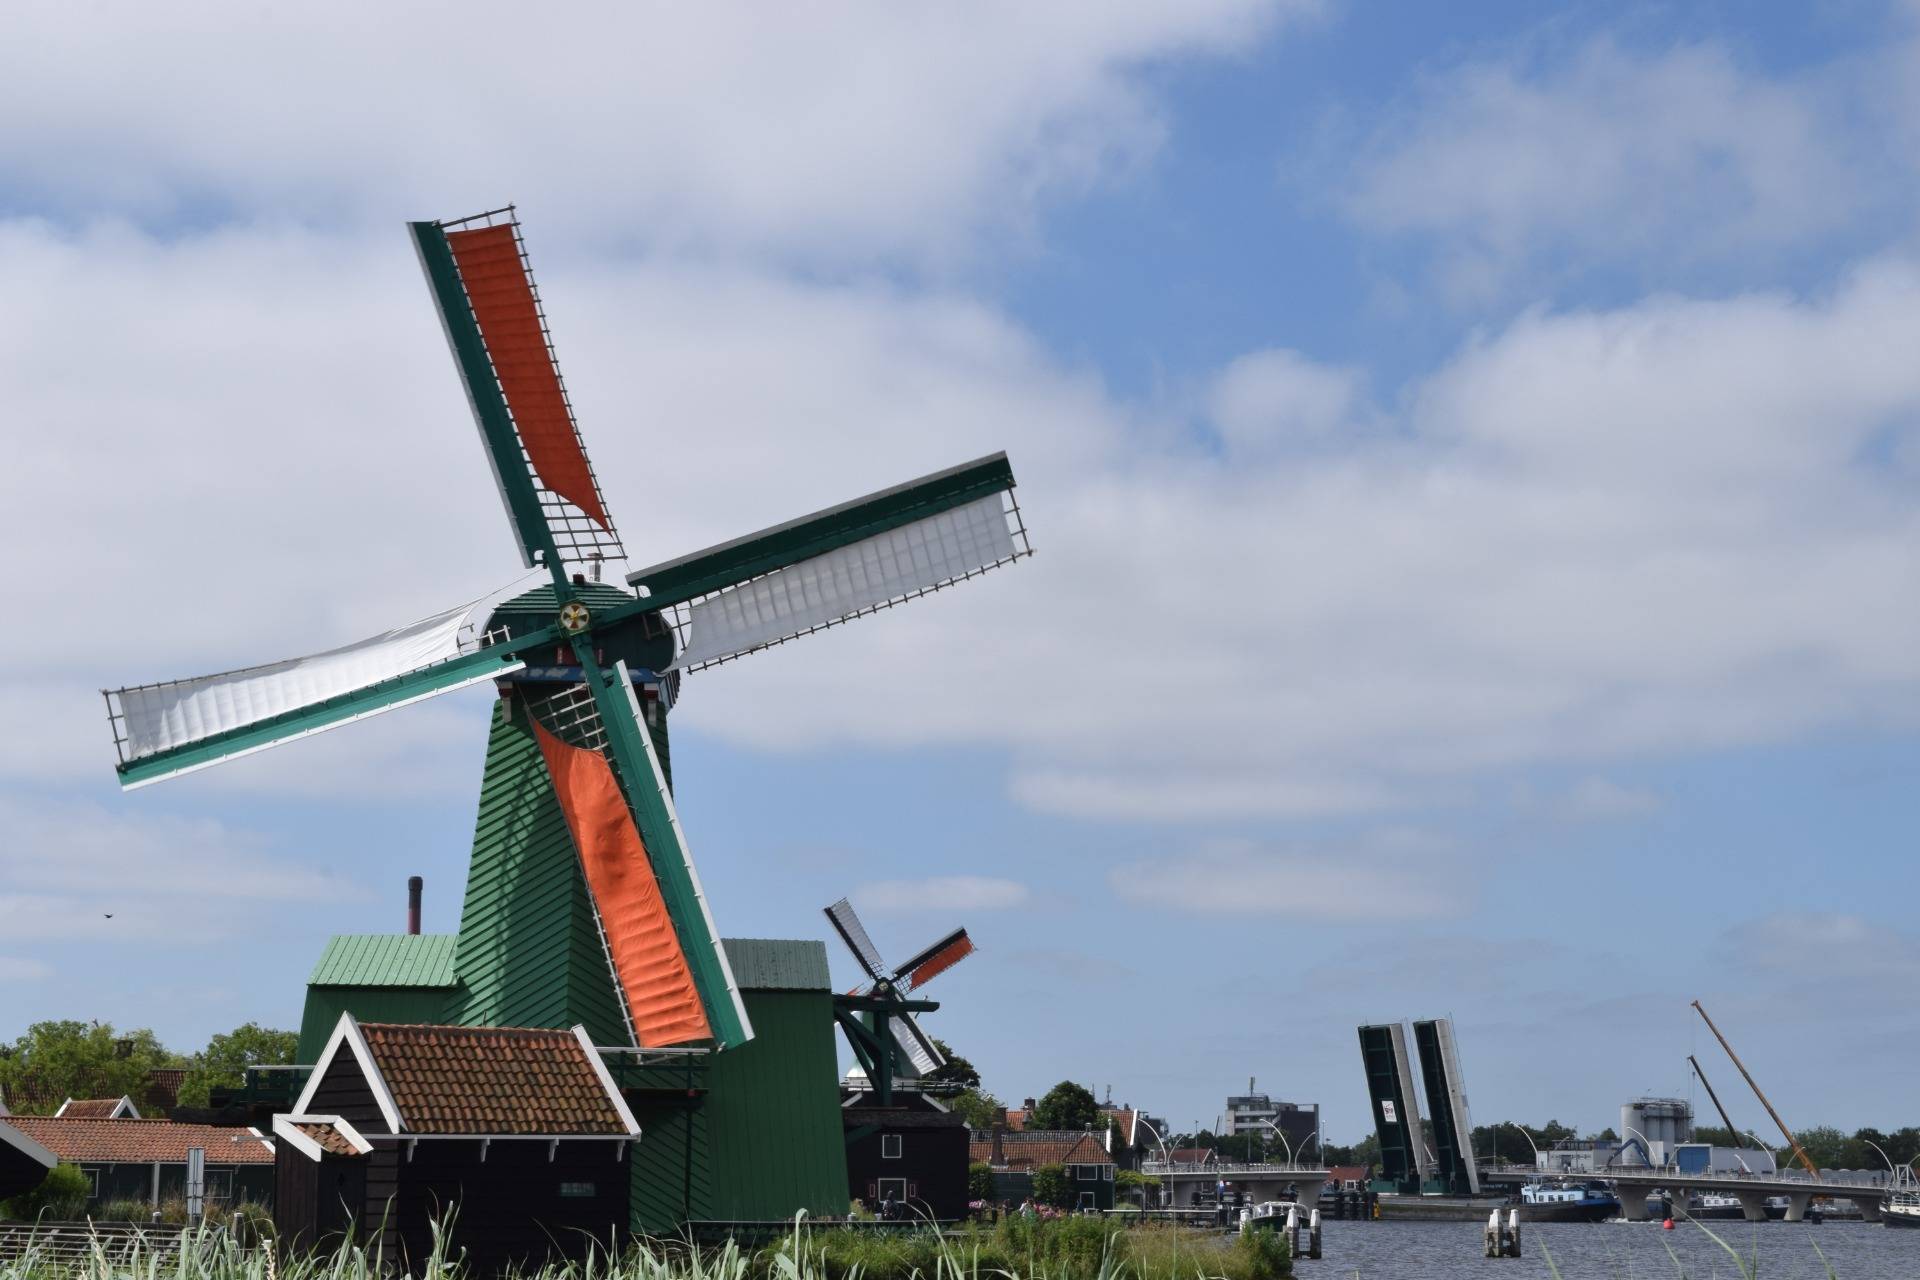 One of the many windmills in Zaanse Schans